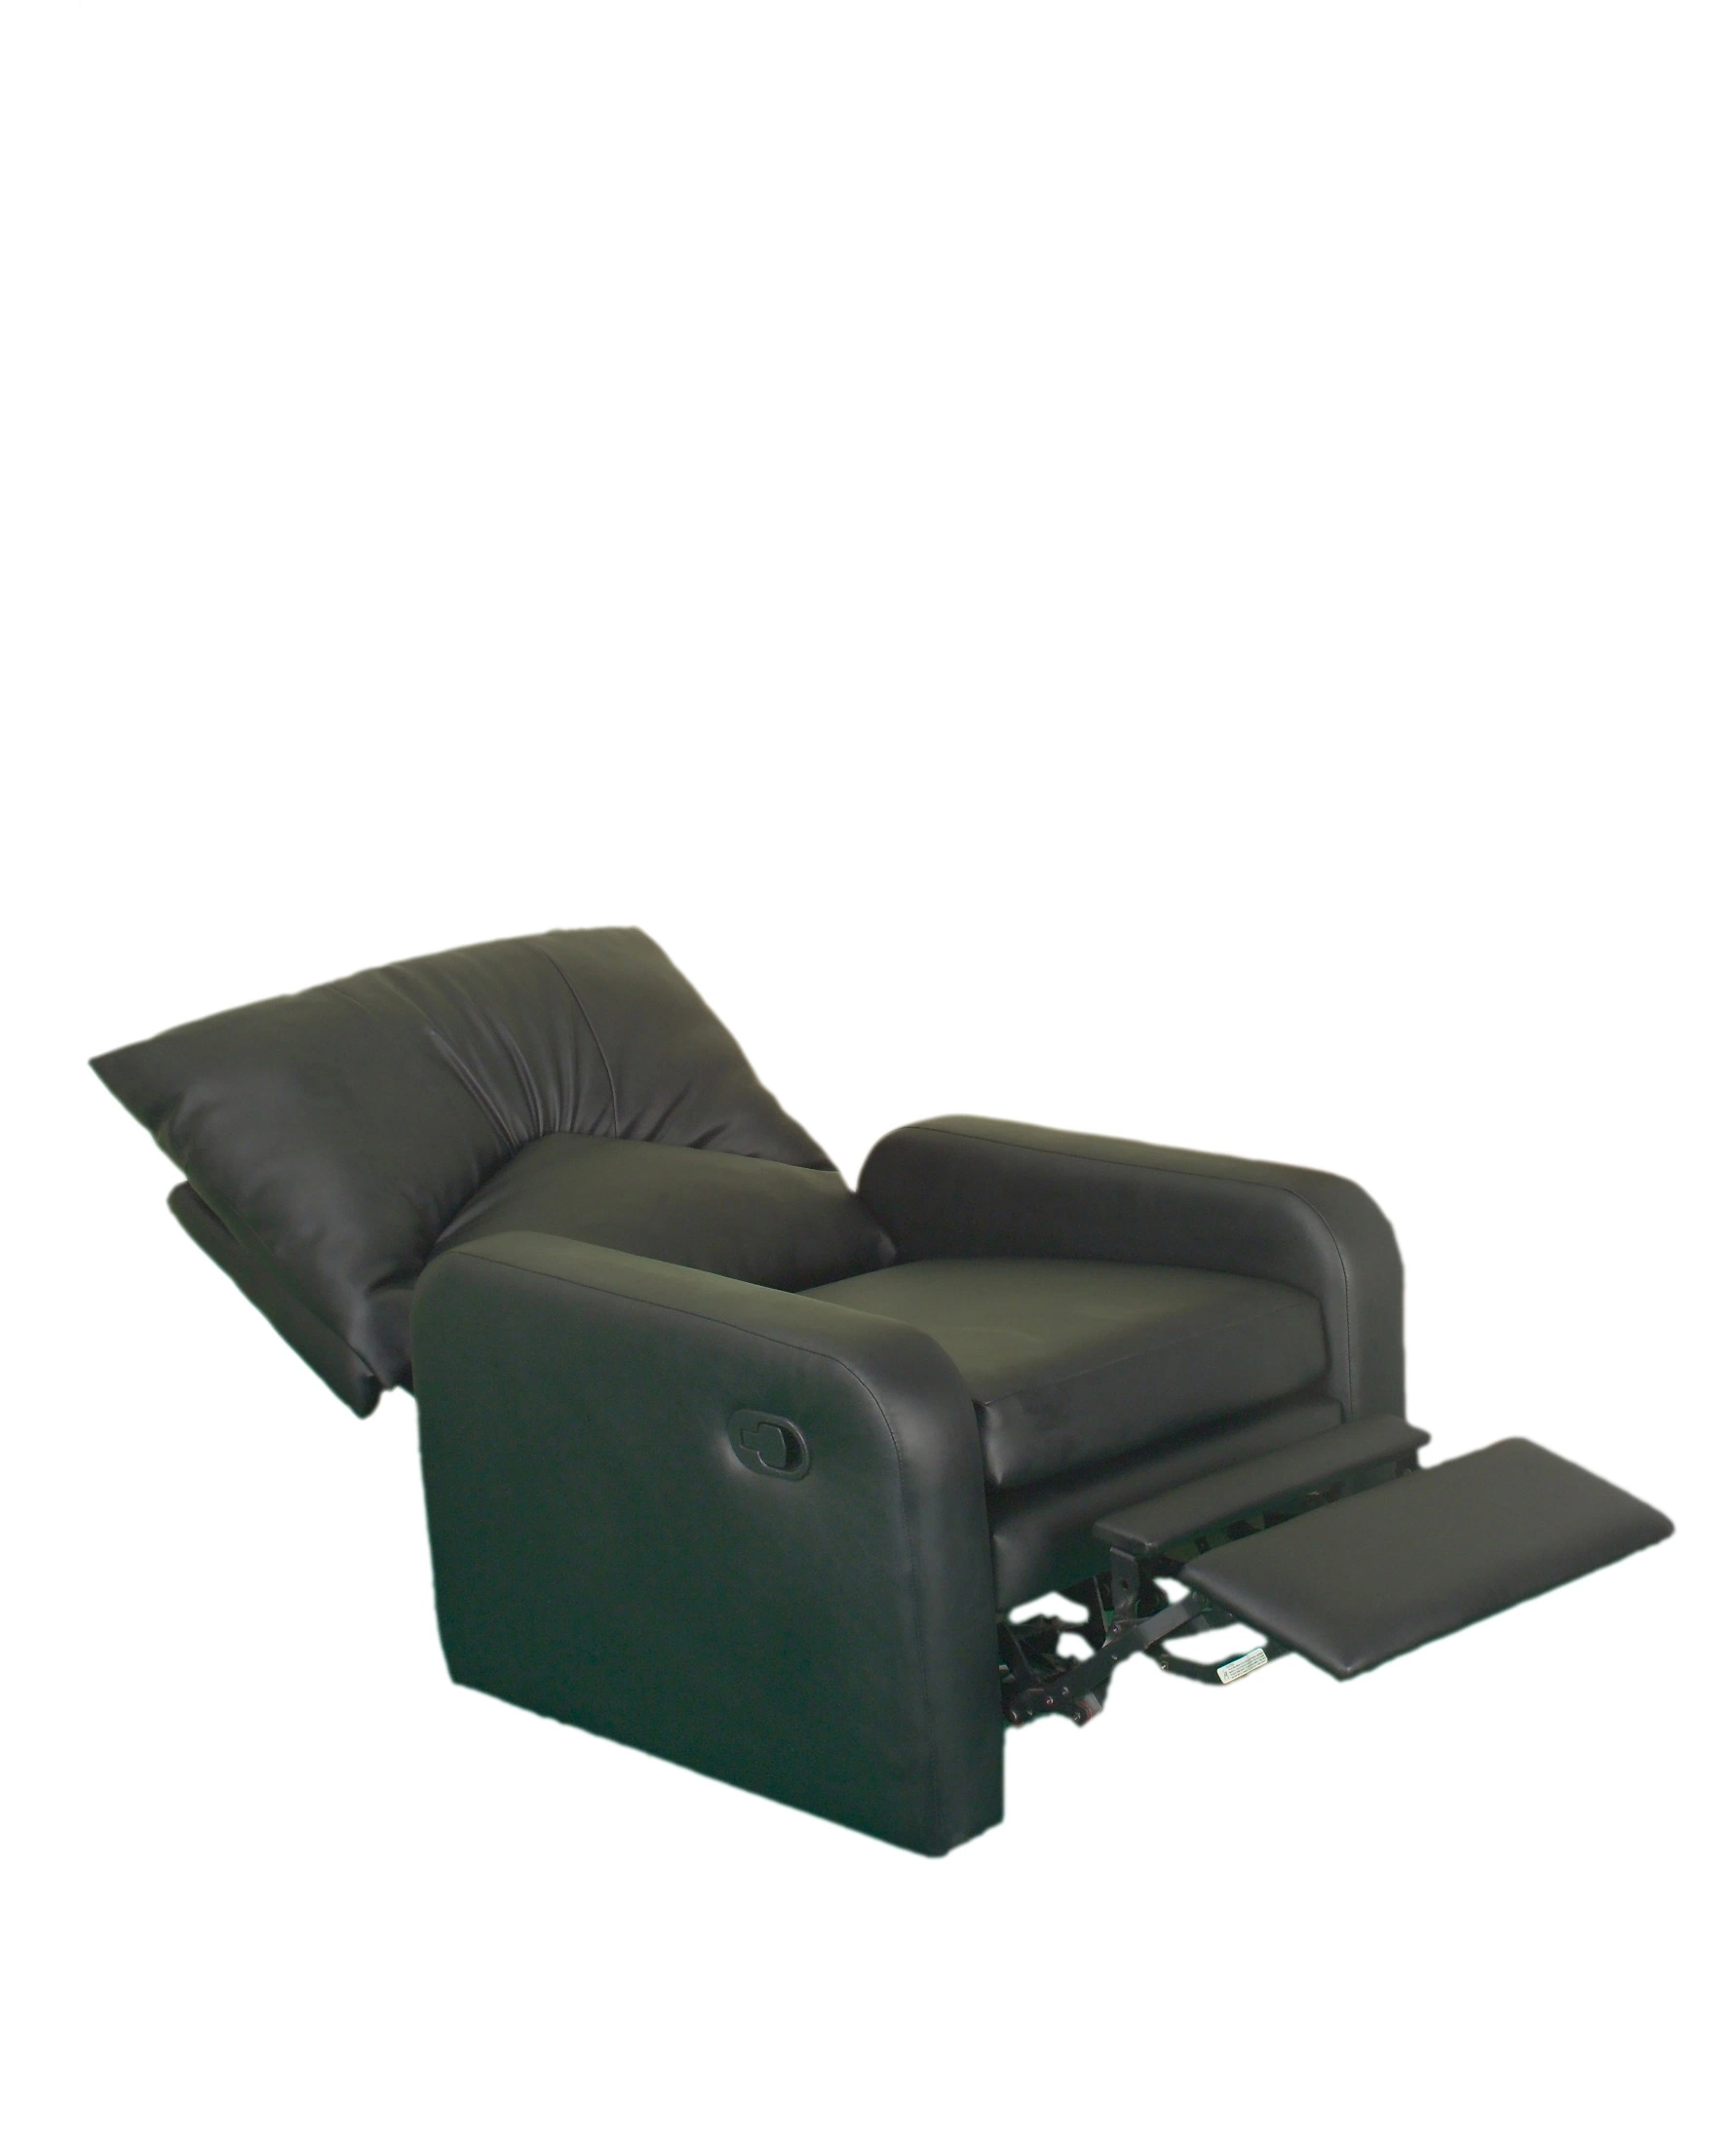 European EPA Approved Brother Medical Standard Packing Shanghai Couch Massage Chair